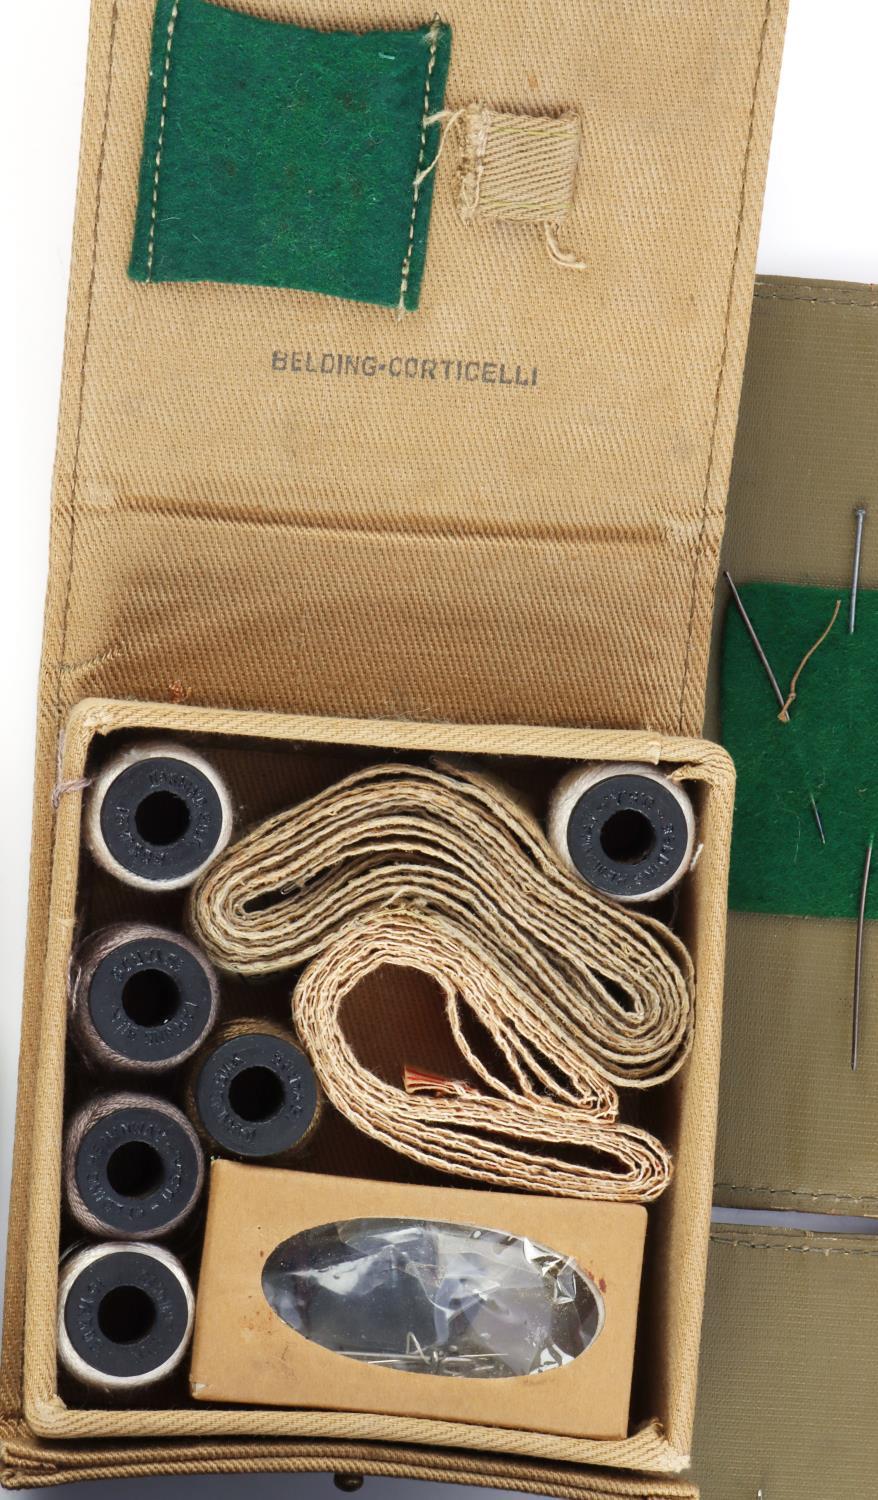 Sold at Auction: VINTAGE BELDING- CORTICELLI MILITARY SEWING KIT